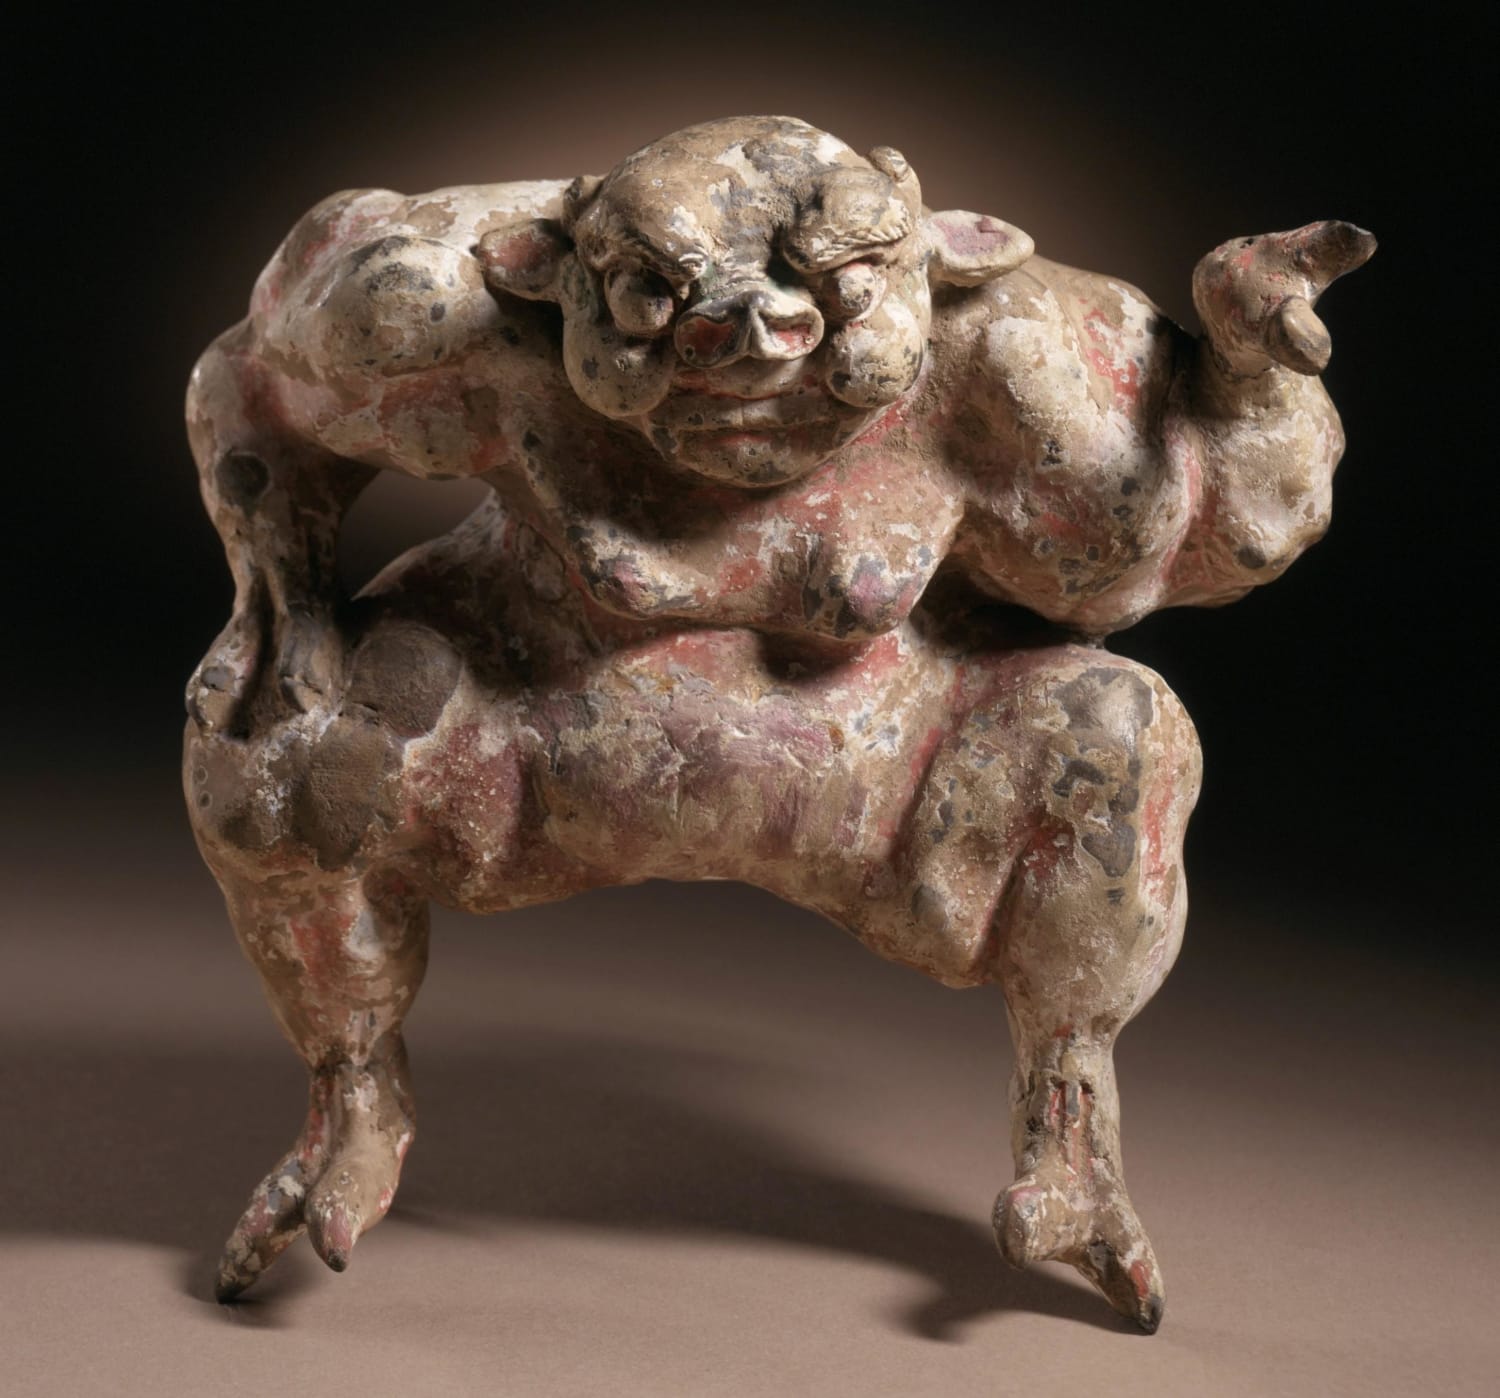 Funerary sculpture of a demon, early Tang dynasty, China, about 618-700, molded earthenware with incised decoration and traces of white slip and paint, now housed at the Los Angeles county museum of art.